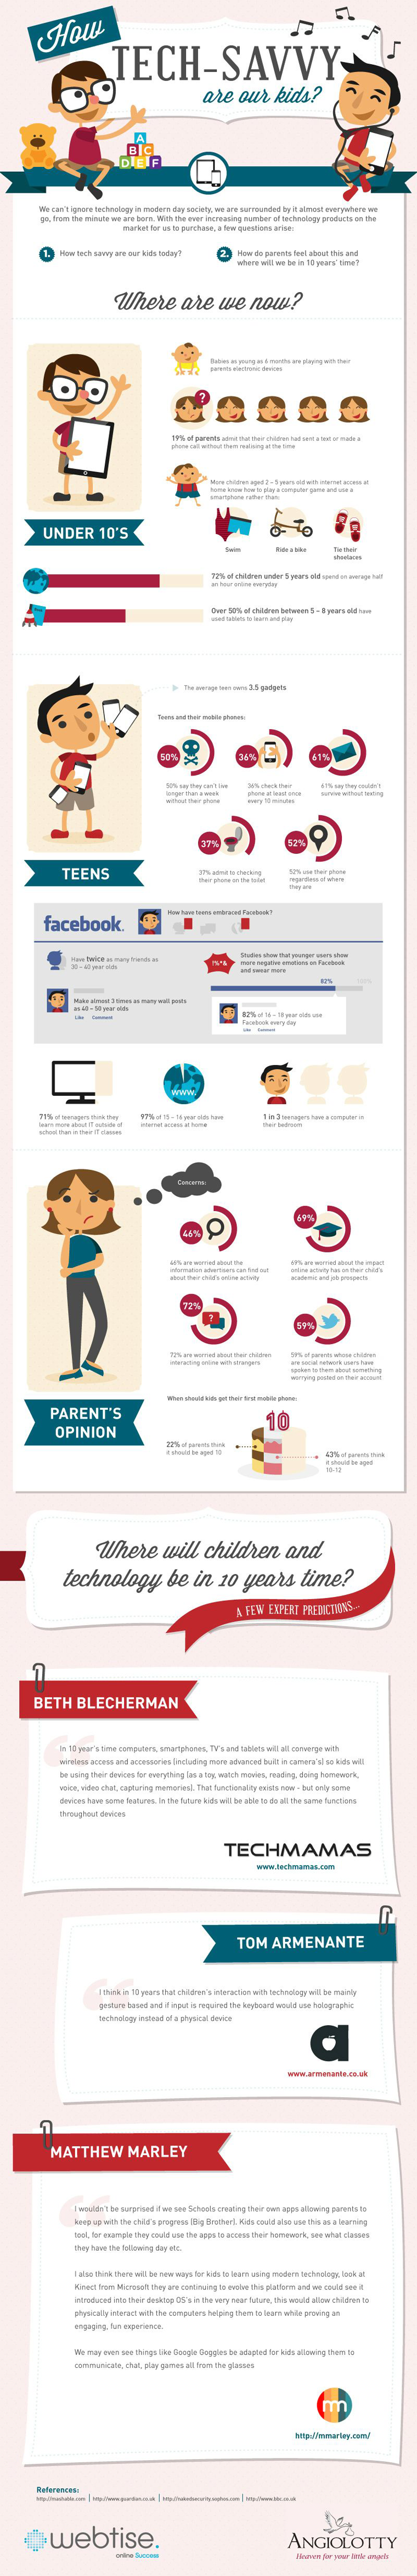 Digital Natives Bond With Technology Early Infographic Edtech Magazine